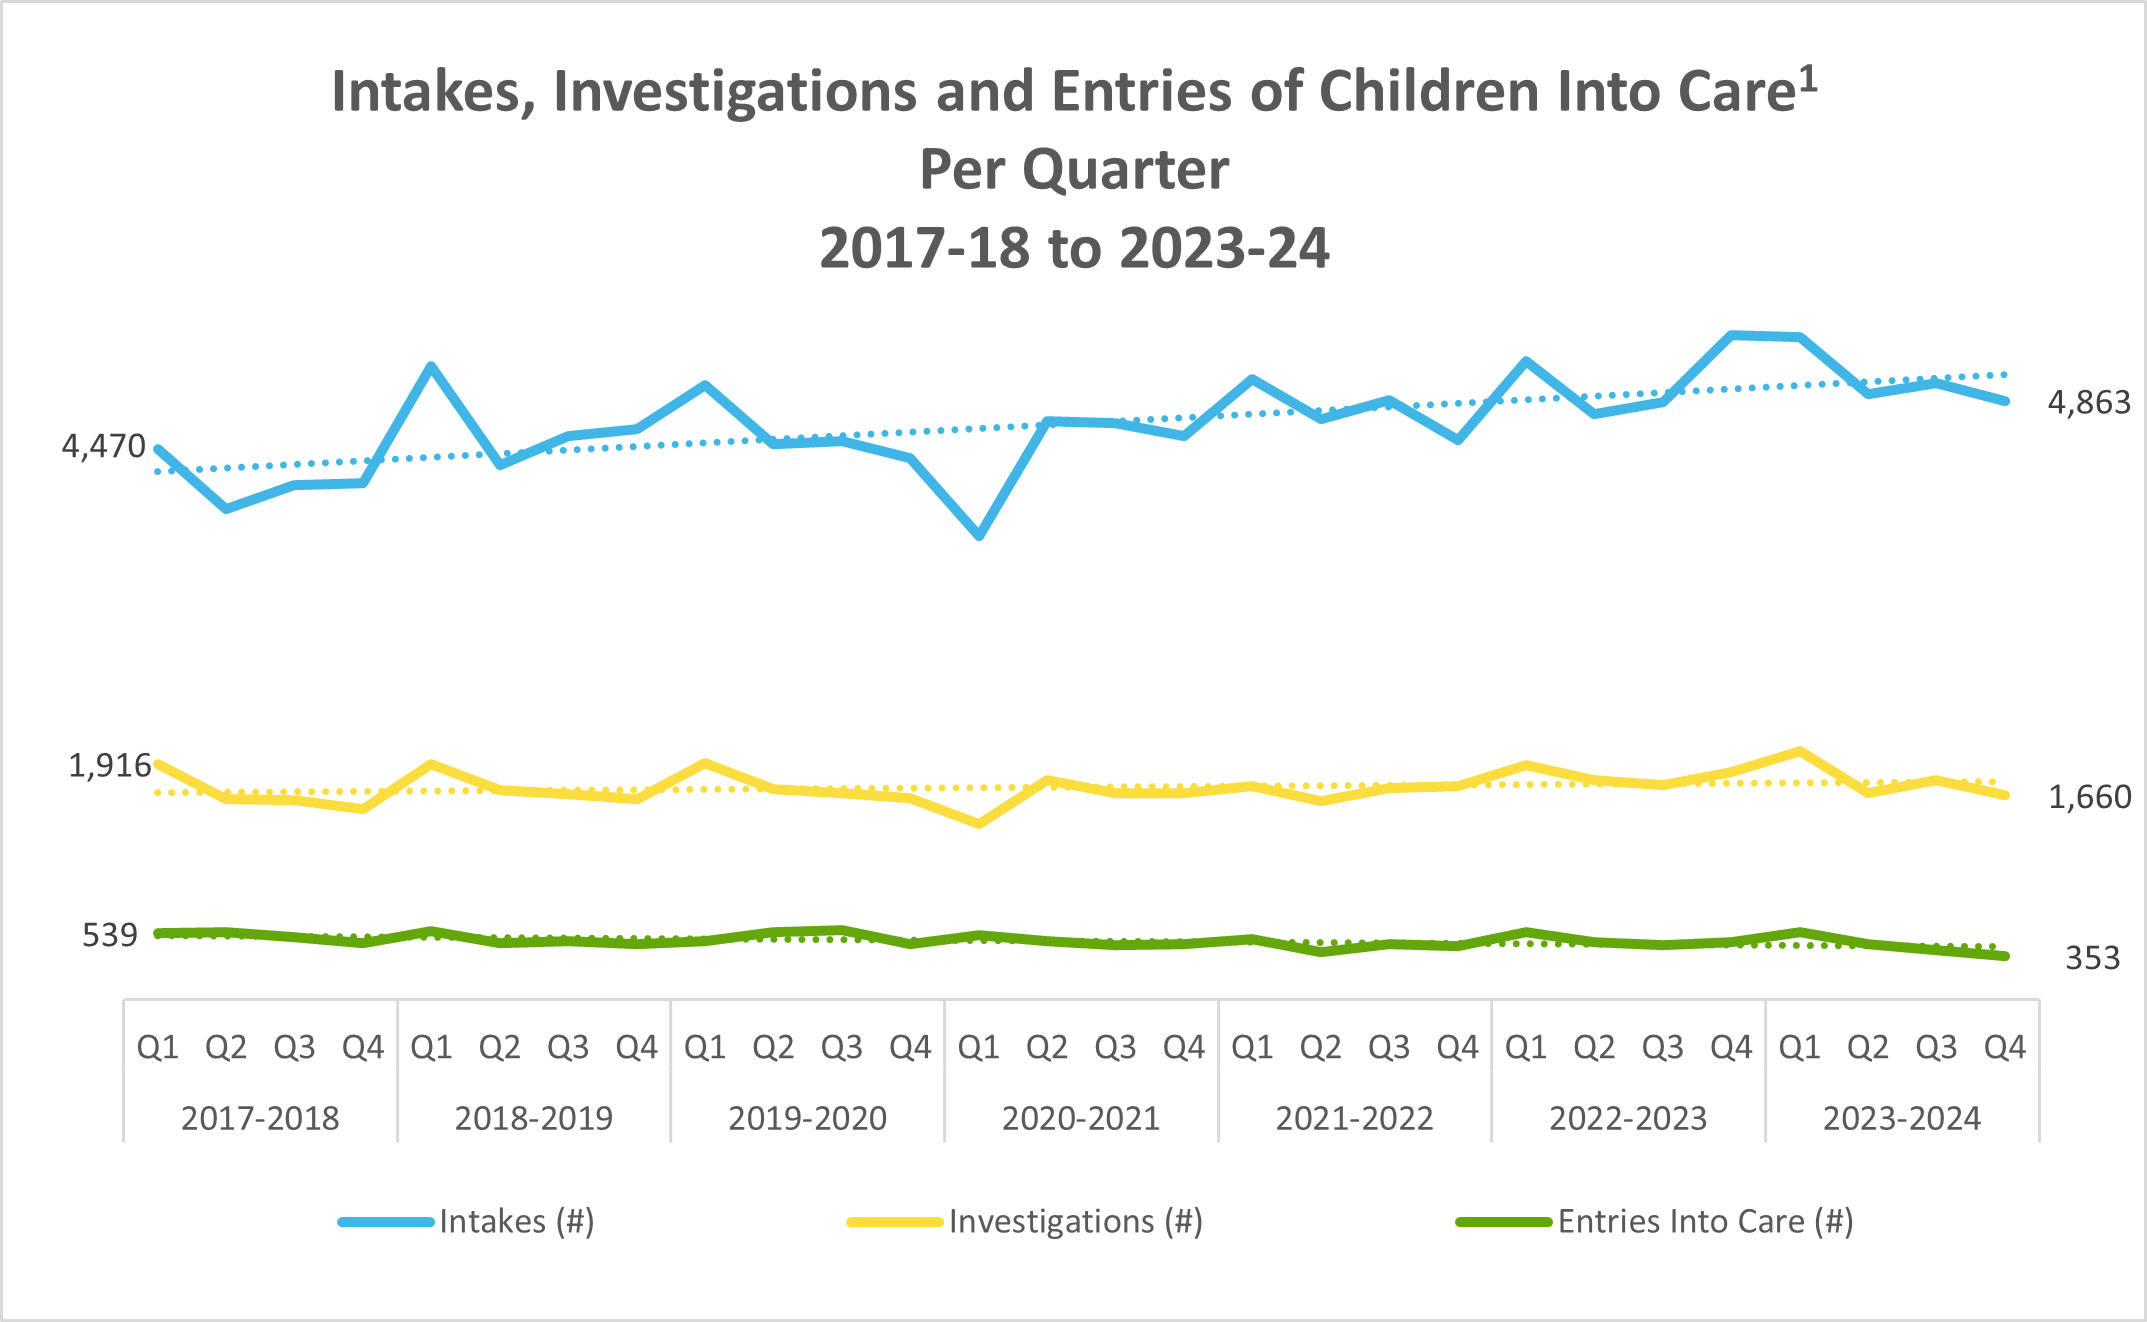 Numbers of Intakes, Investigations and Children Entering Care 2017-2023